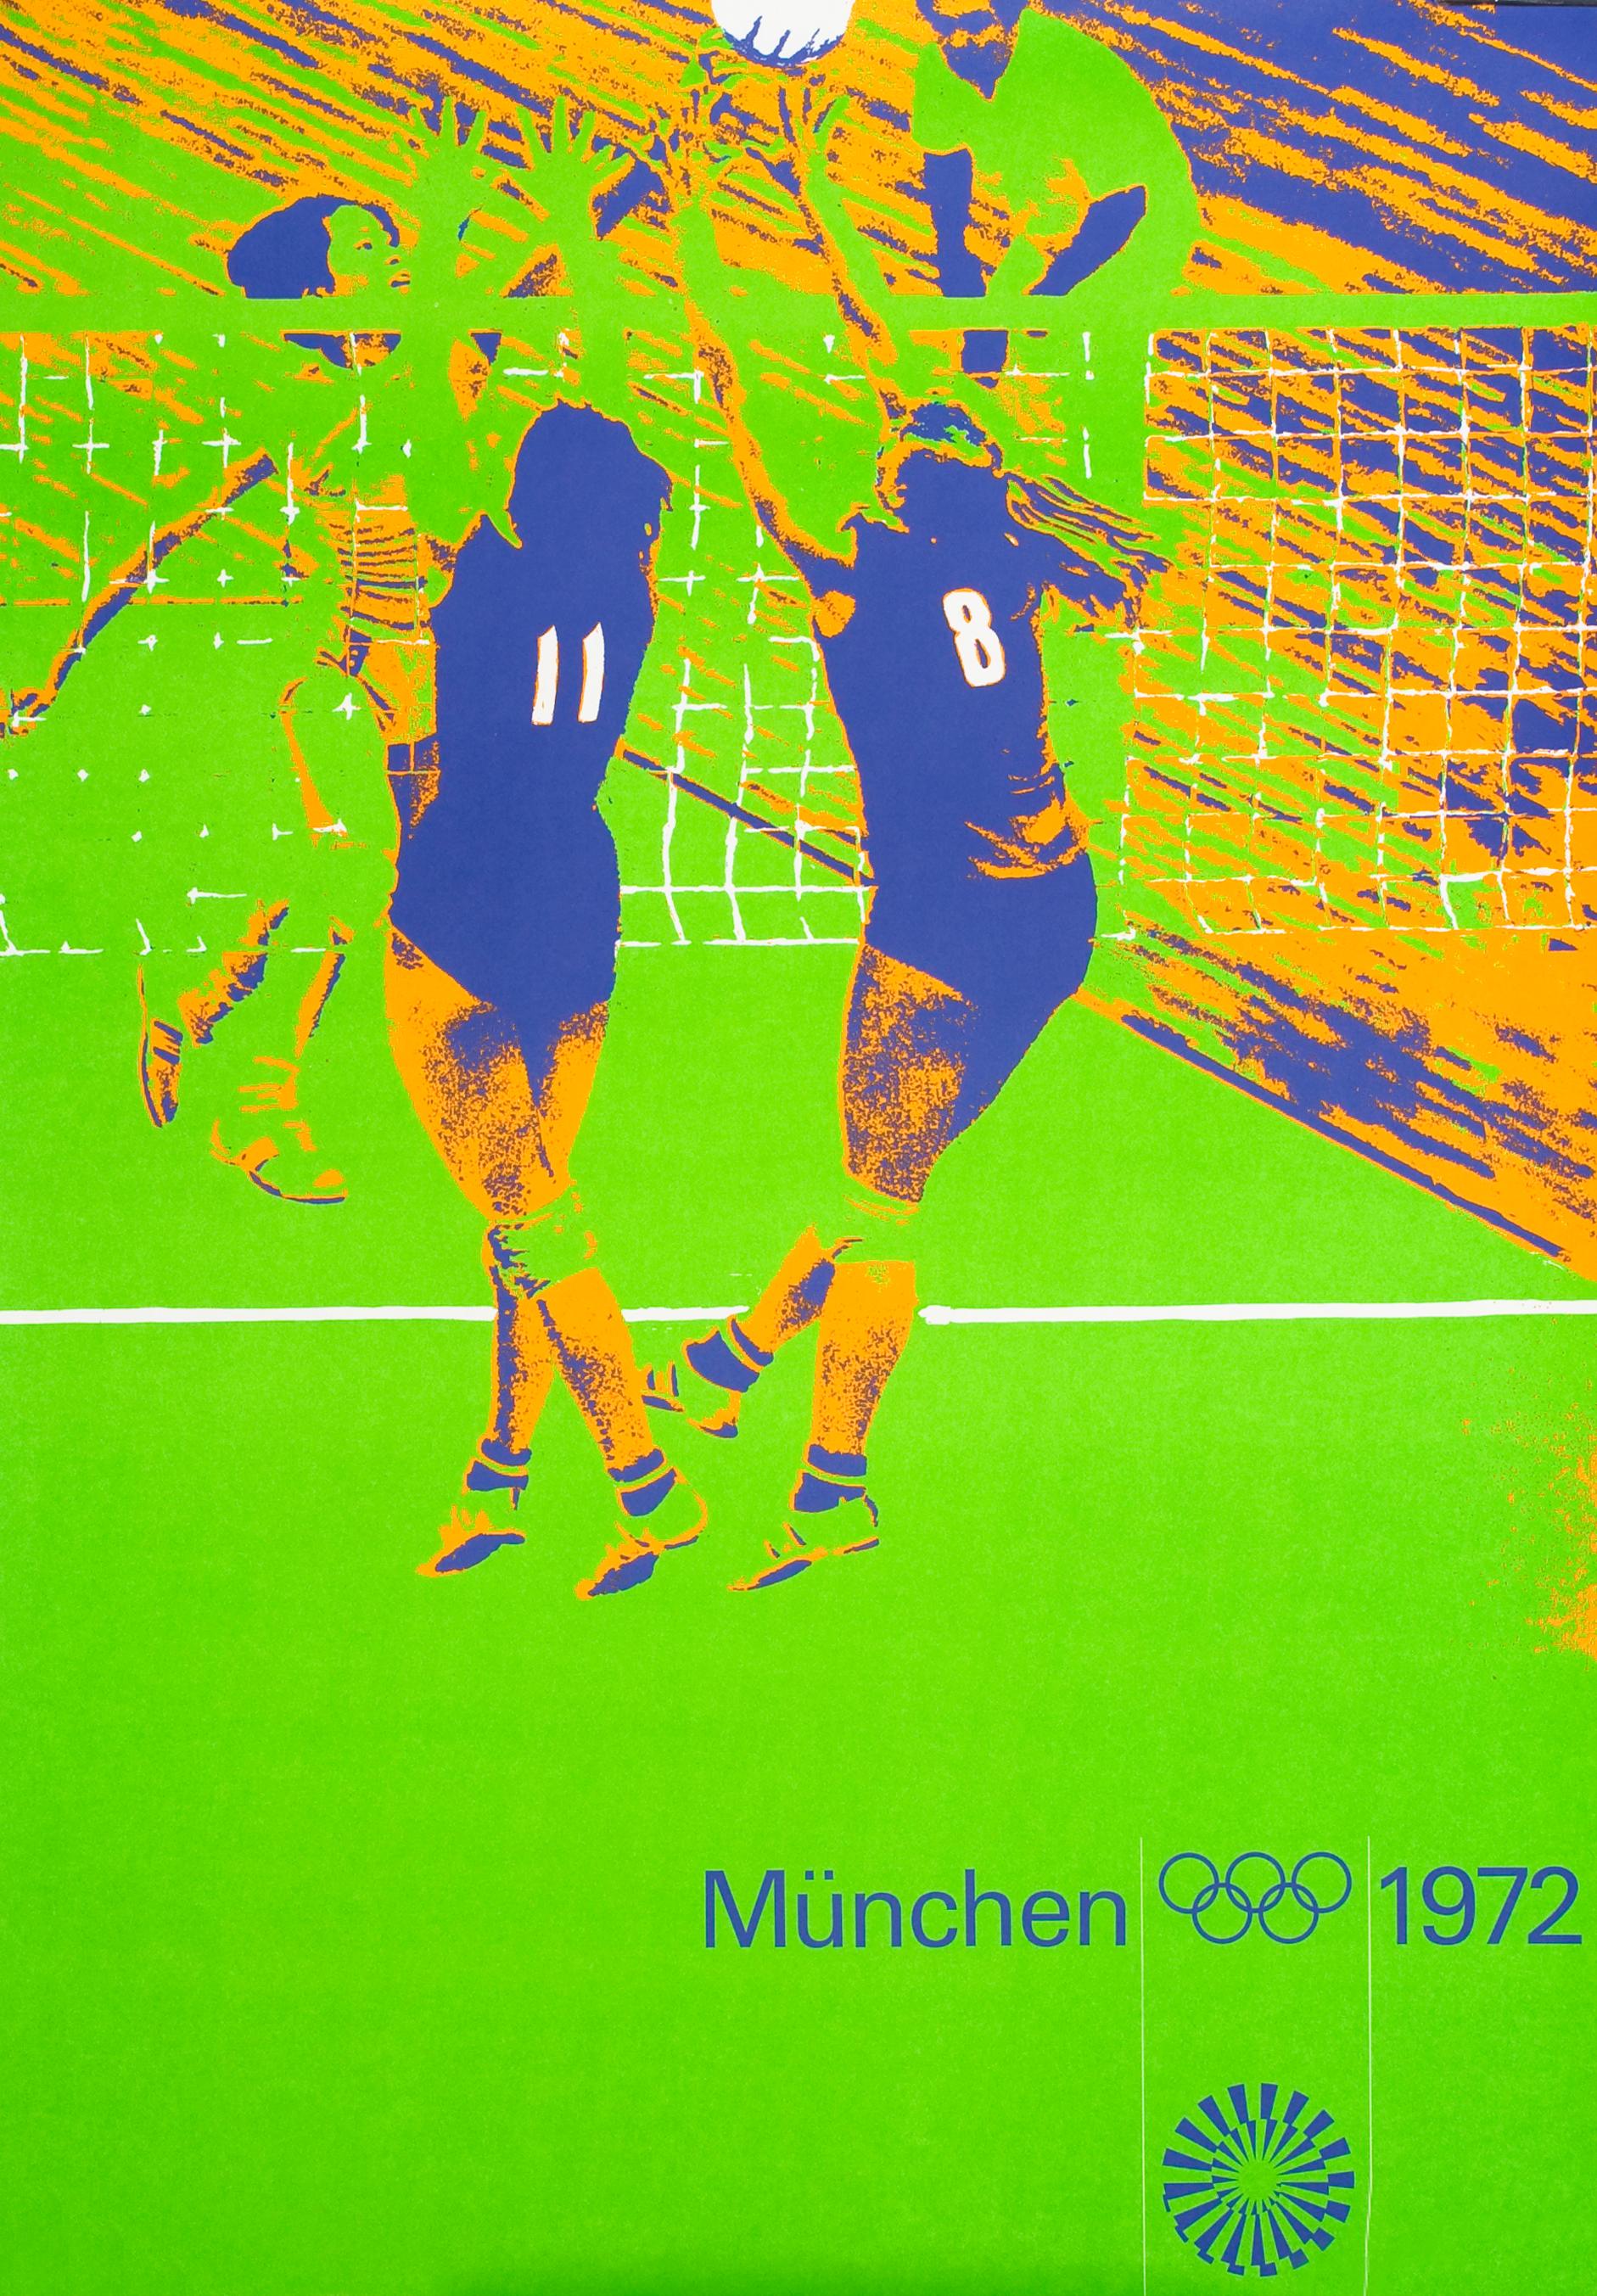 "Olympic Games 1972 - Volleyball" Munich Sports Original Vintage Poster - Print by Otl Aicher